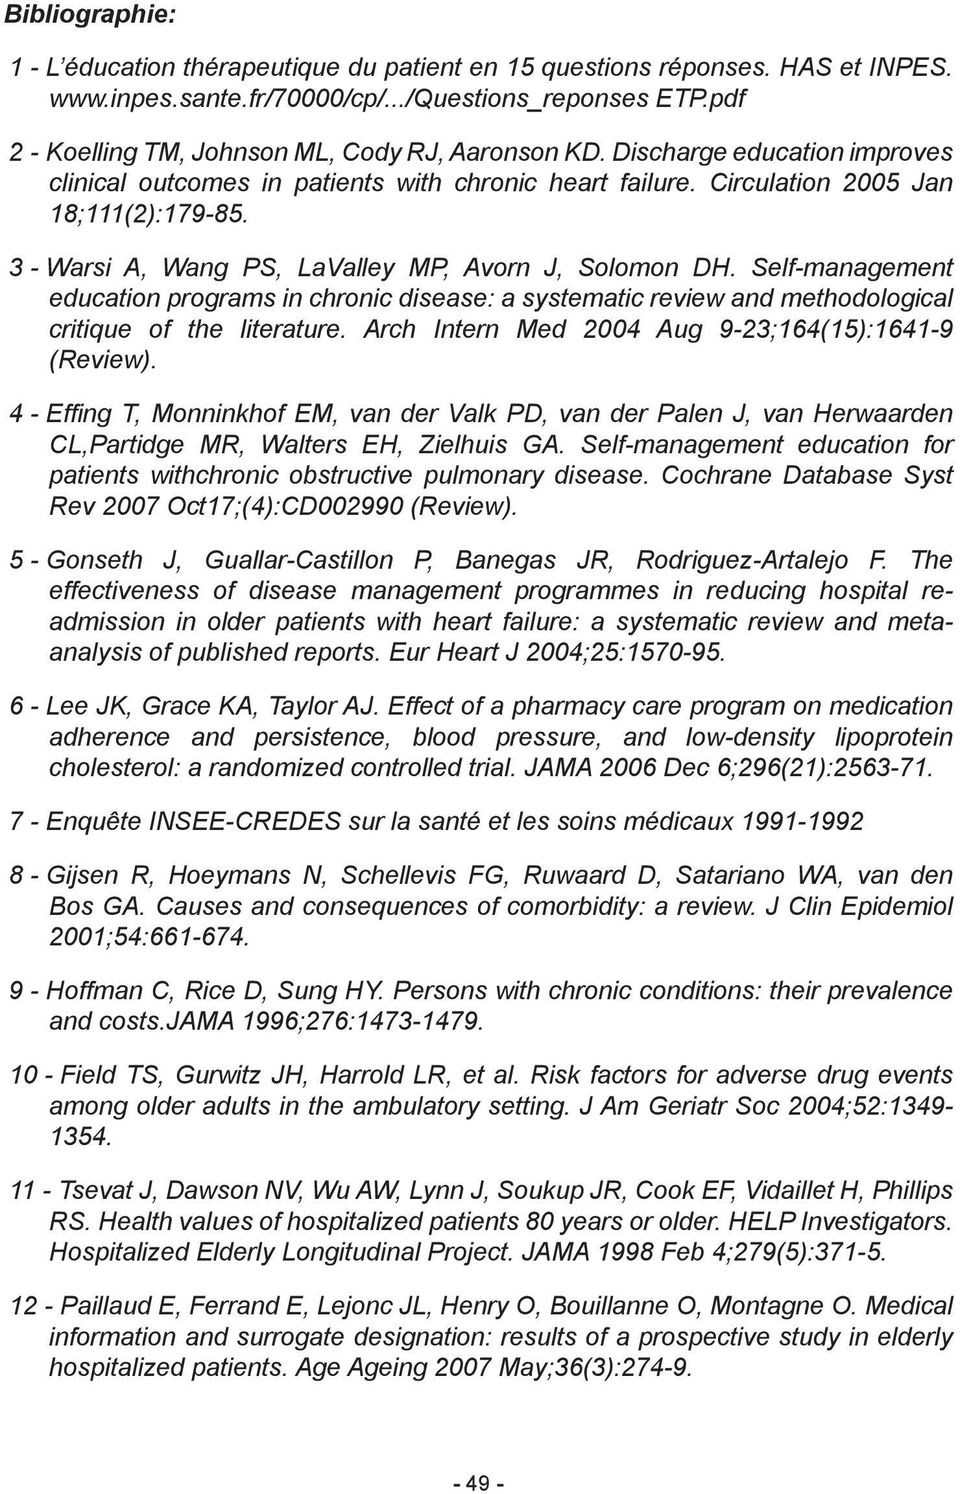 3 - Warsi A, Wang PS, LaValley MP, Avorn J, Solomon DH. Self-management education programs in chronic disease: a systematic review and methodological critique of the literature.